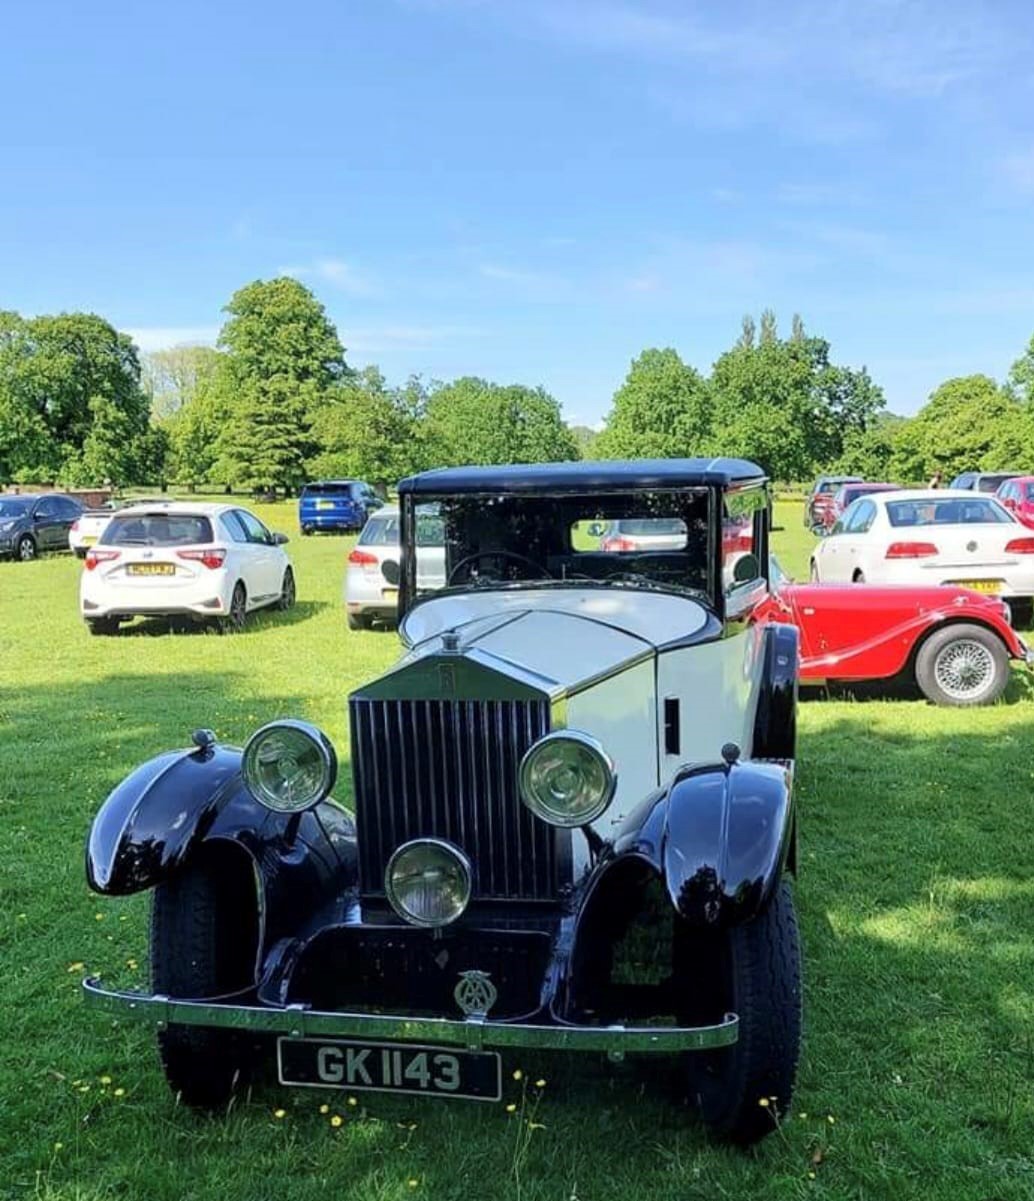 This Rolls Royce was at Peover Hall (Miriam Elder)